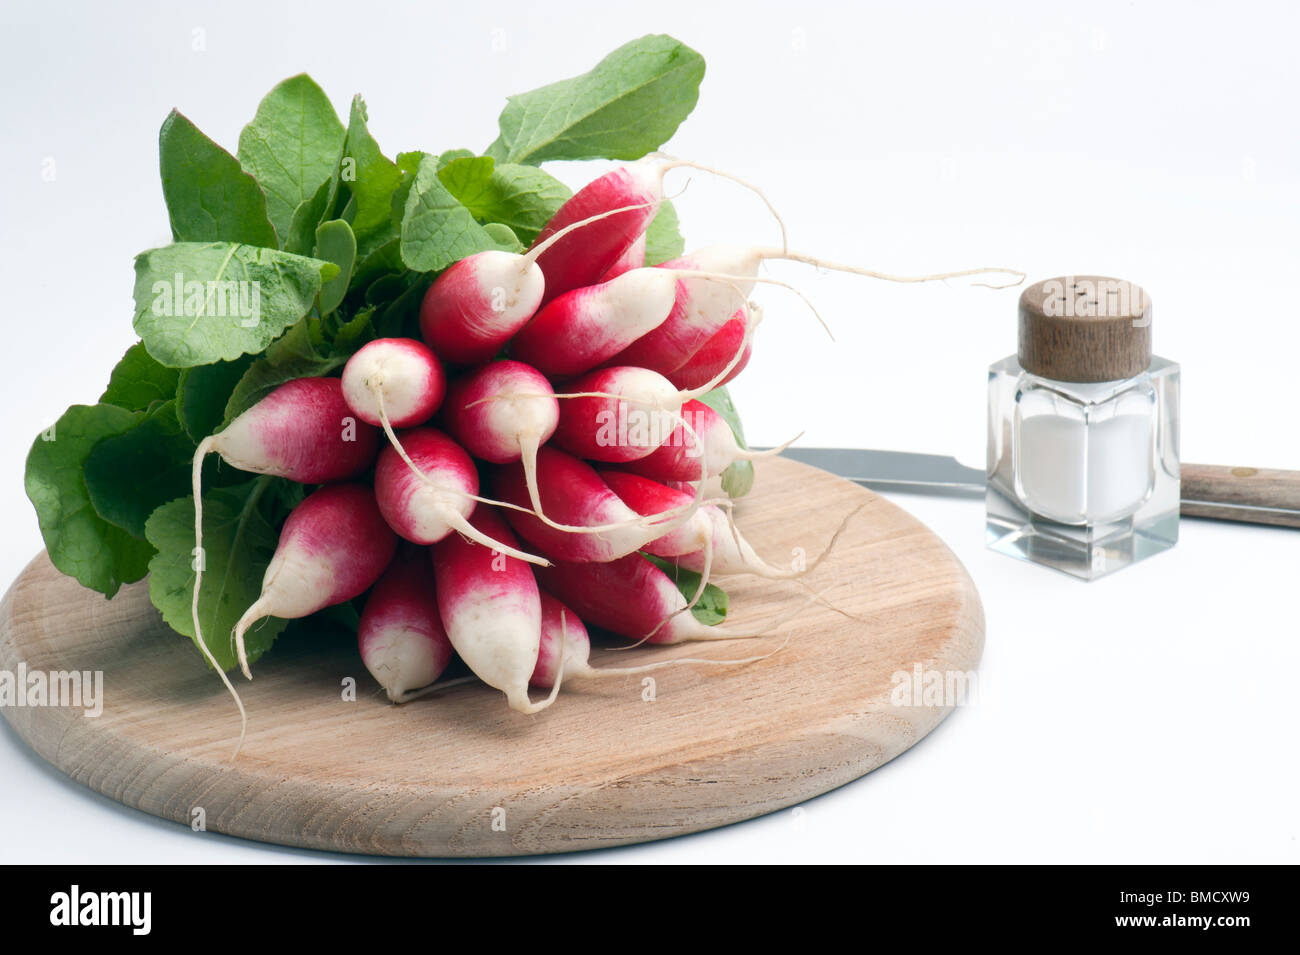 French Breakfast Radish On A Wooden Chopping Board, With A Salt Pot and Knife, Against A White Background Stock Photo